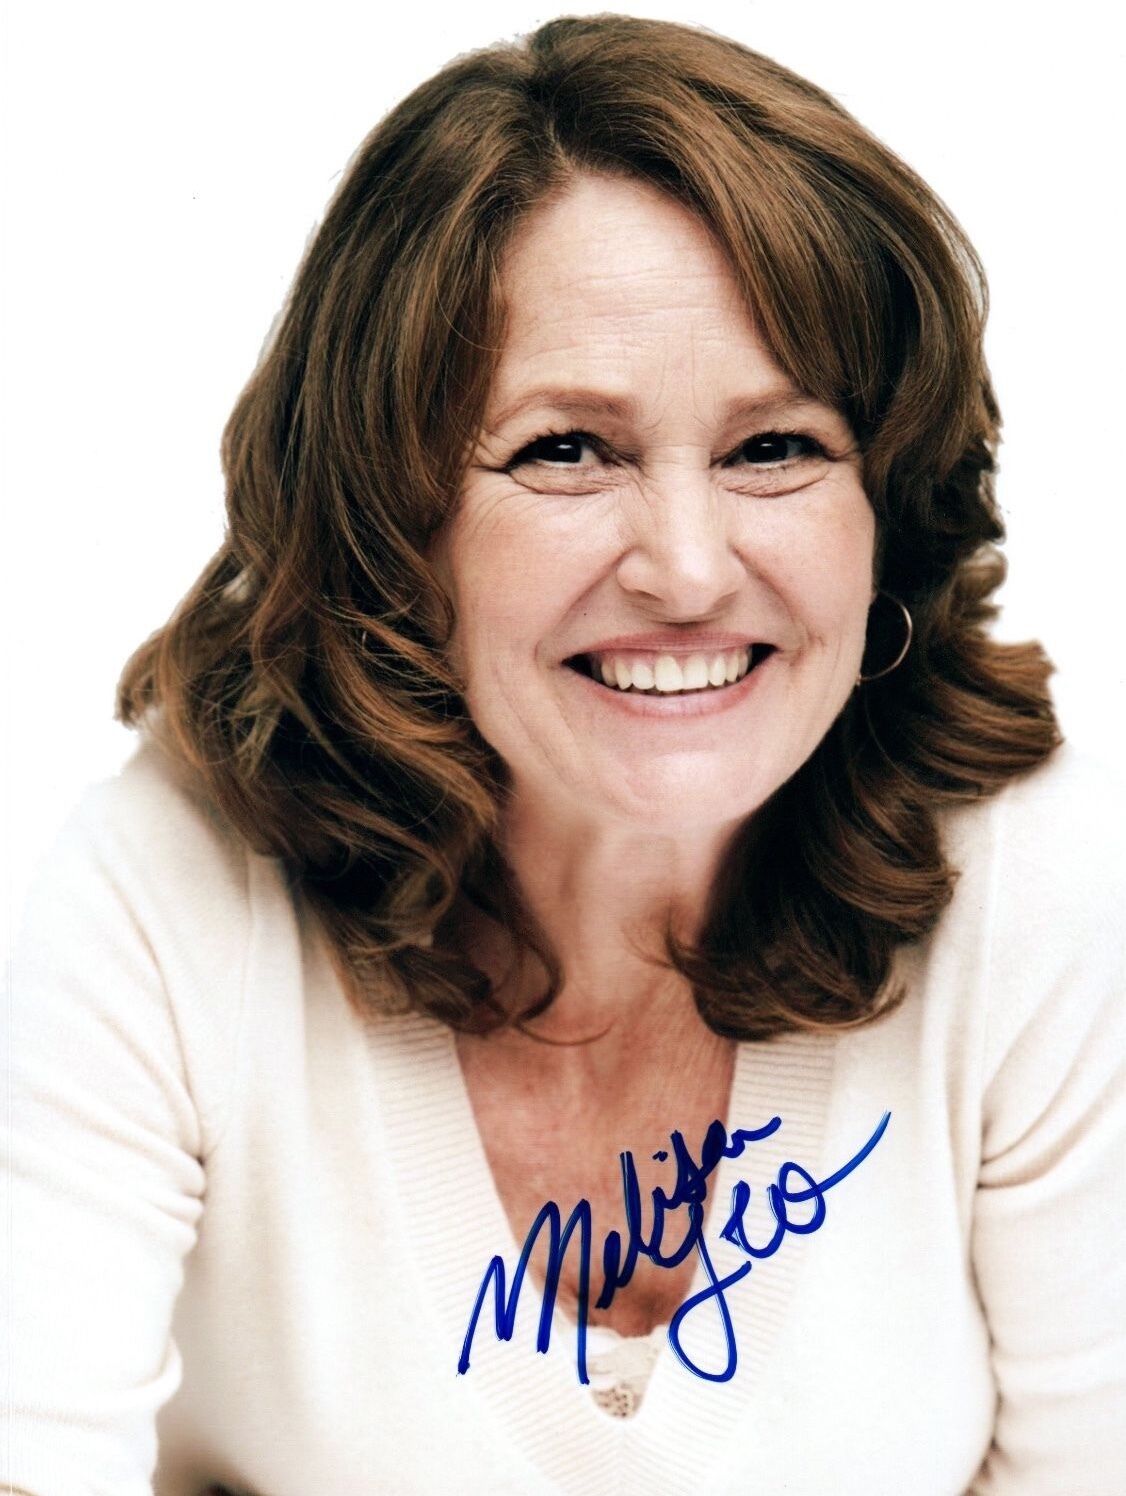 Melissa Leo Signed Autographed 8x10 Photo Poster painting The Fighter COA VD